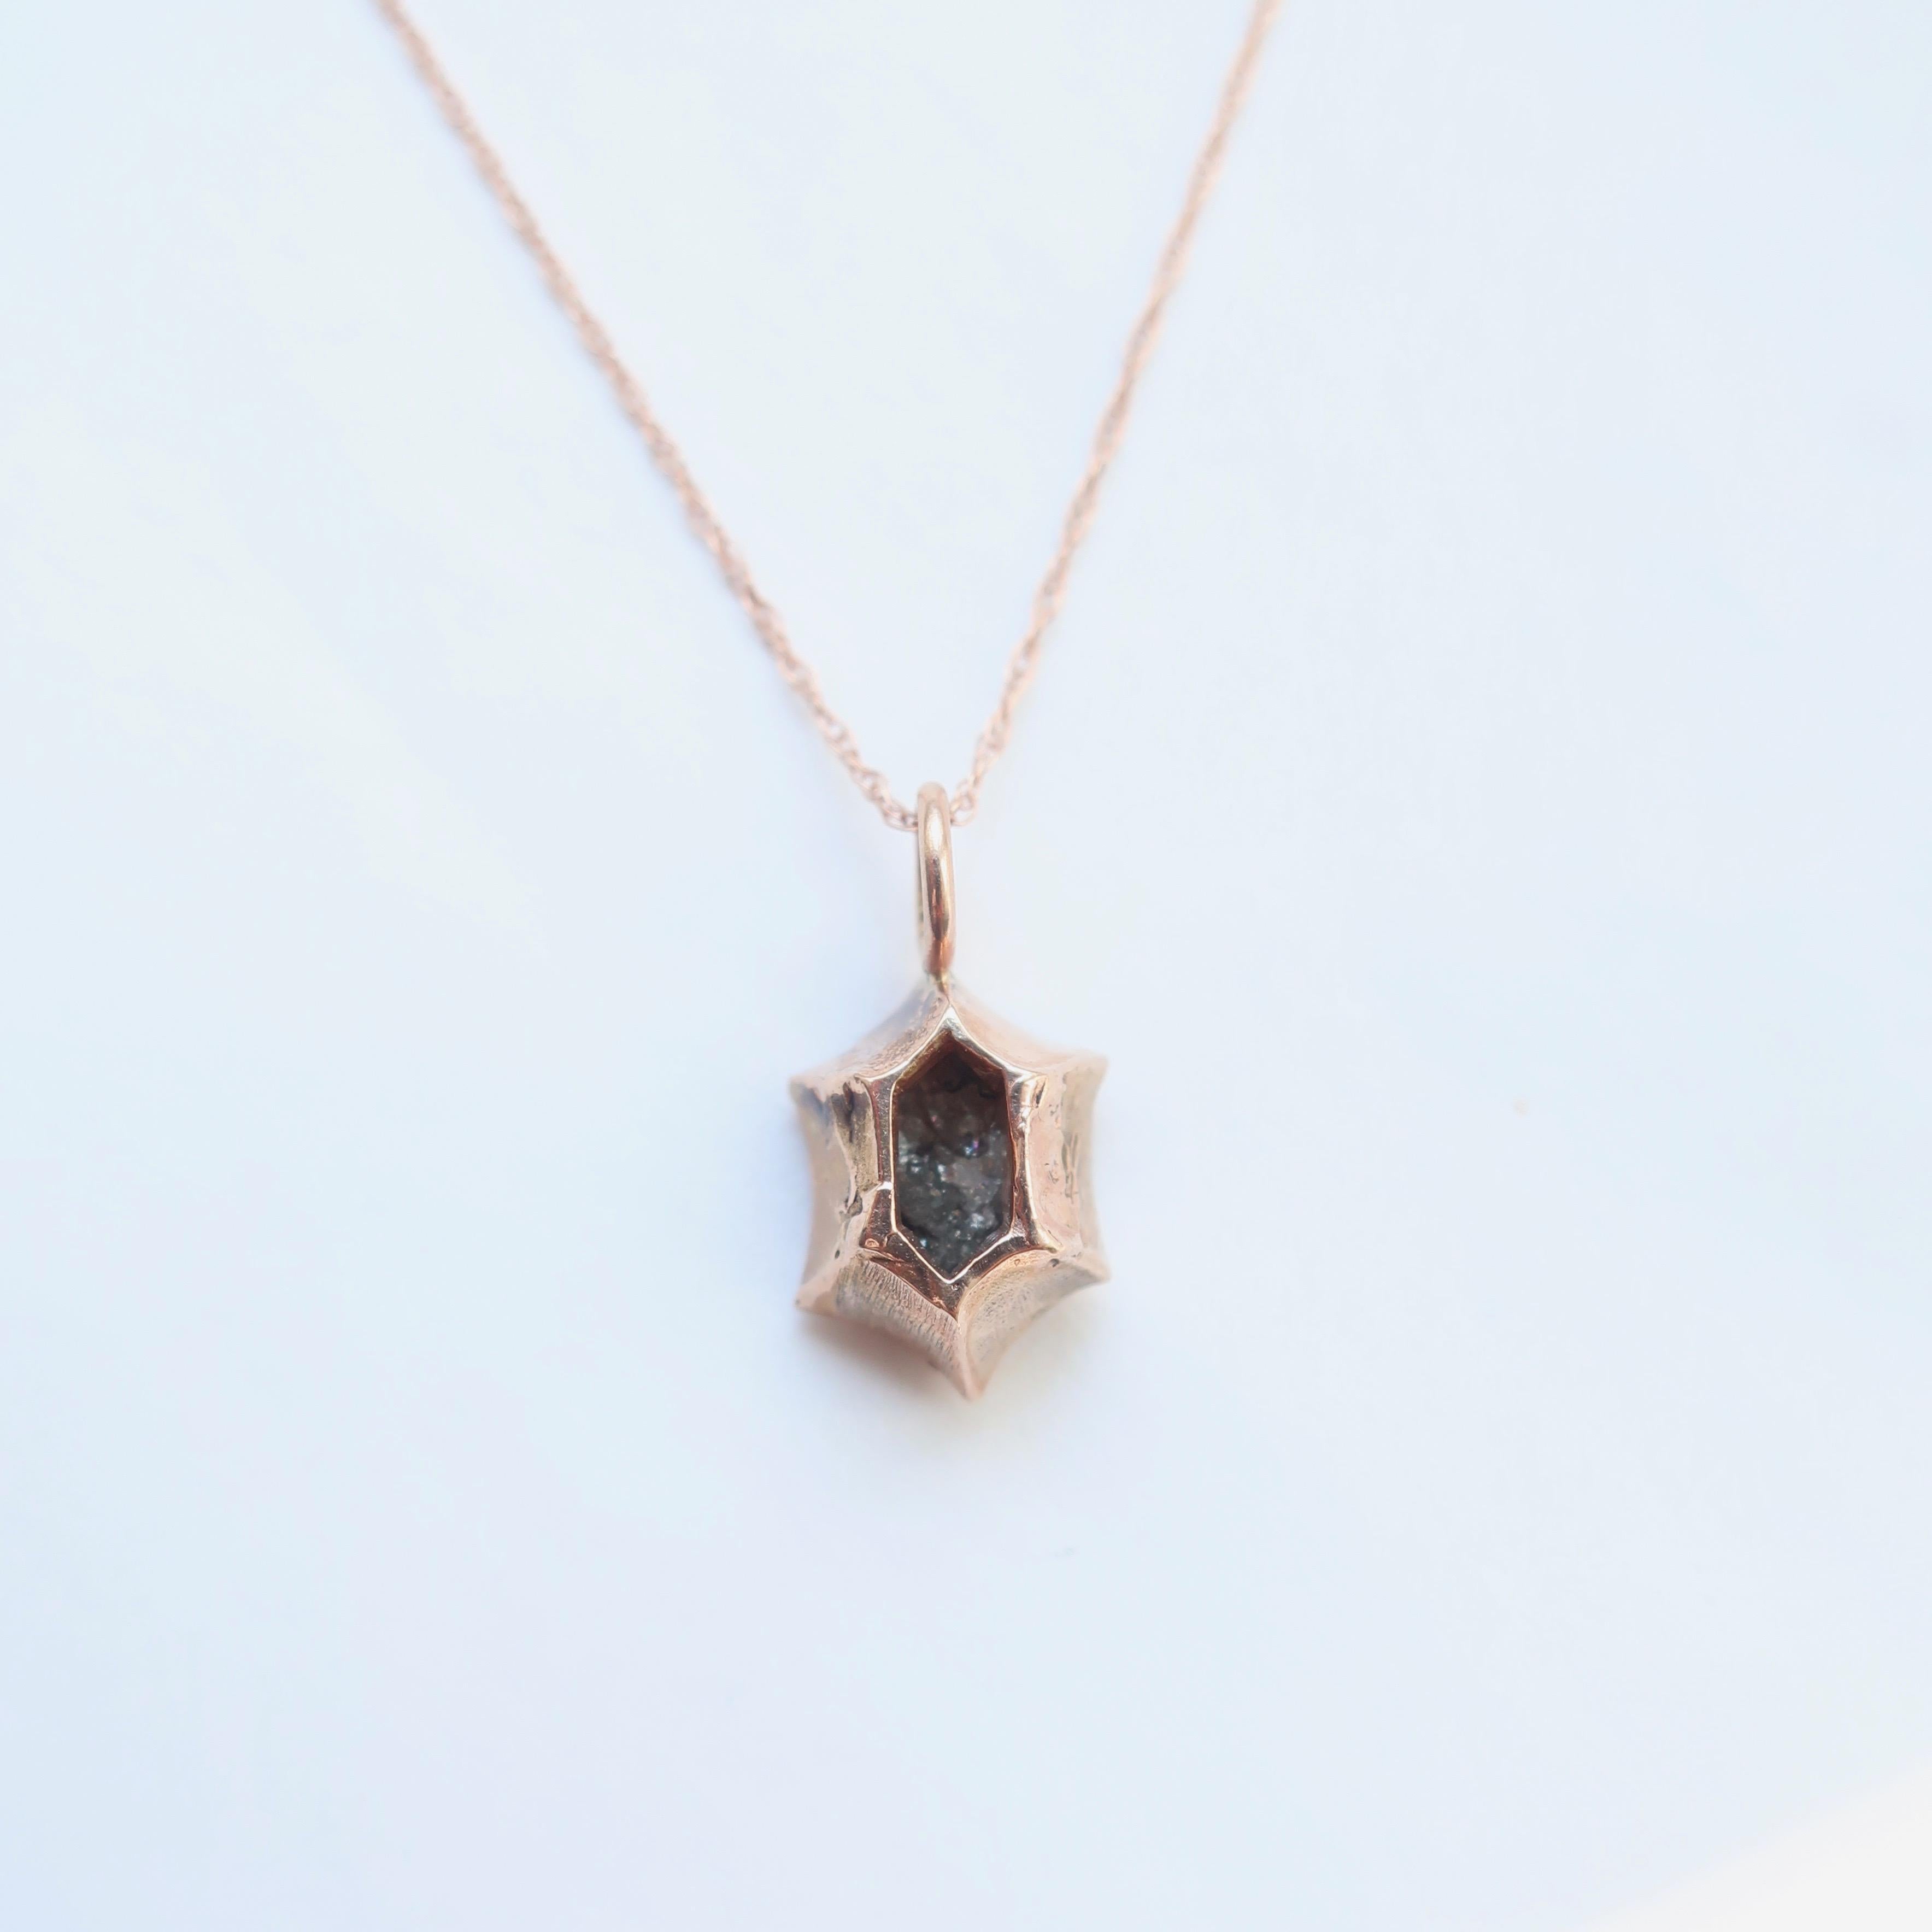 A rustic brown rosecut diamond set in a 14k rose gold setting on an 18 inch gold chain. This is a delicate piece perfect for everyday wear. The diamond measures 7.3 mm in length and weighs 1.10 carats. This piece is hand carved and the sides concave